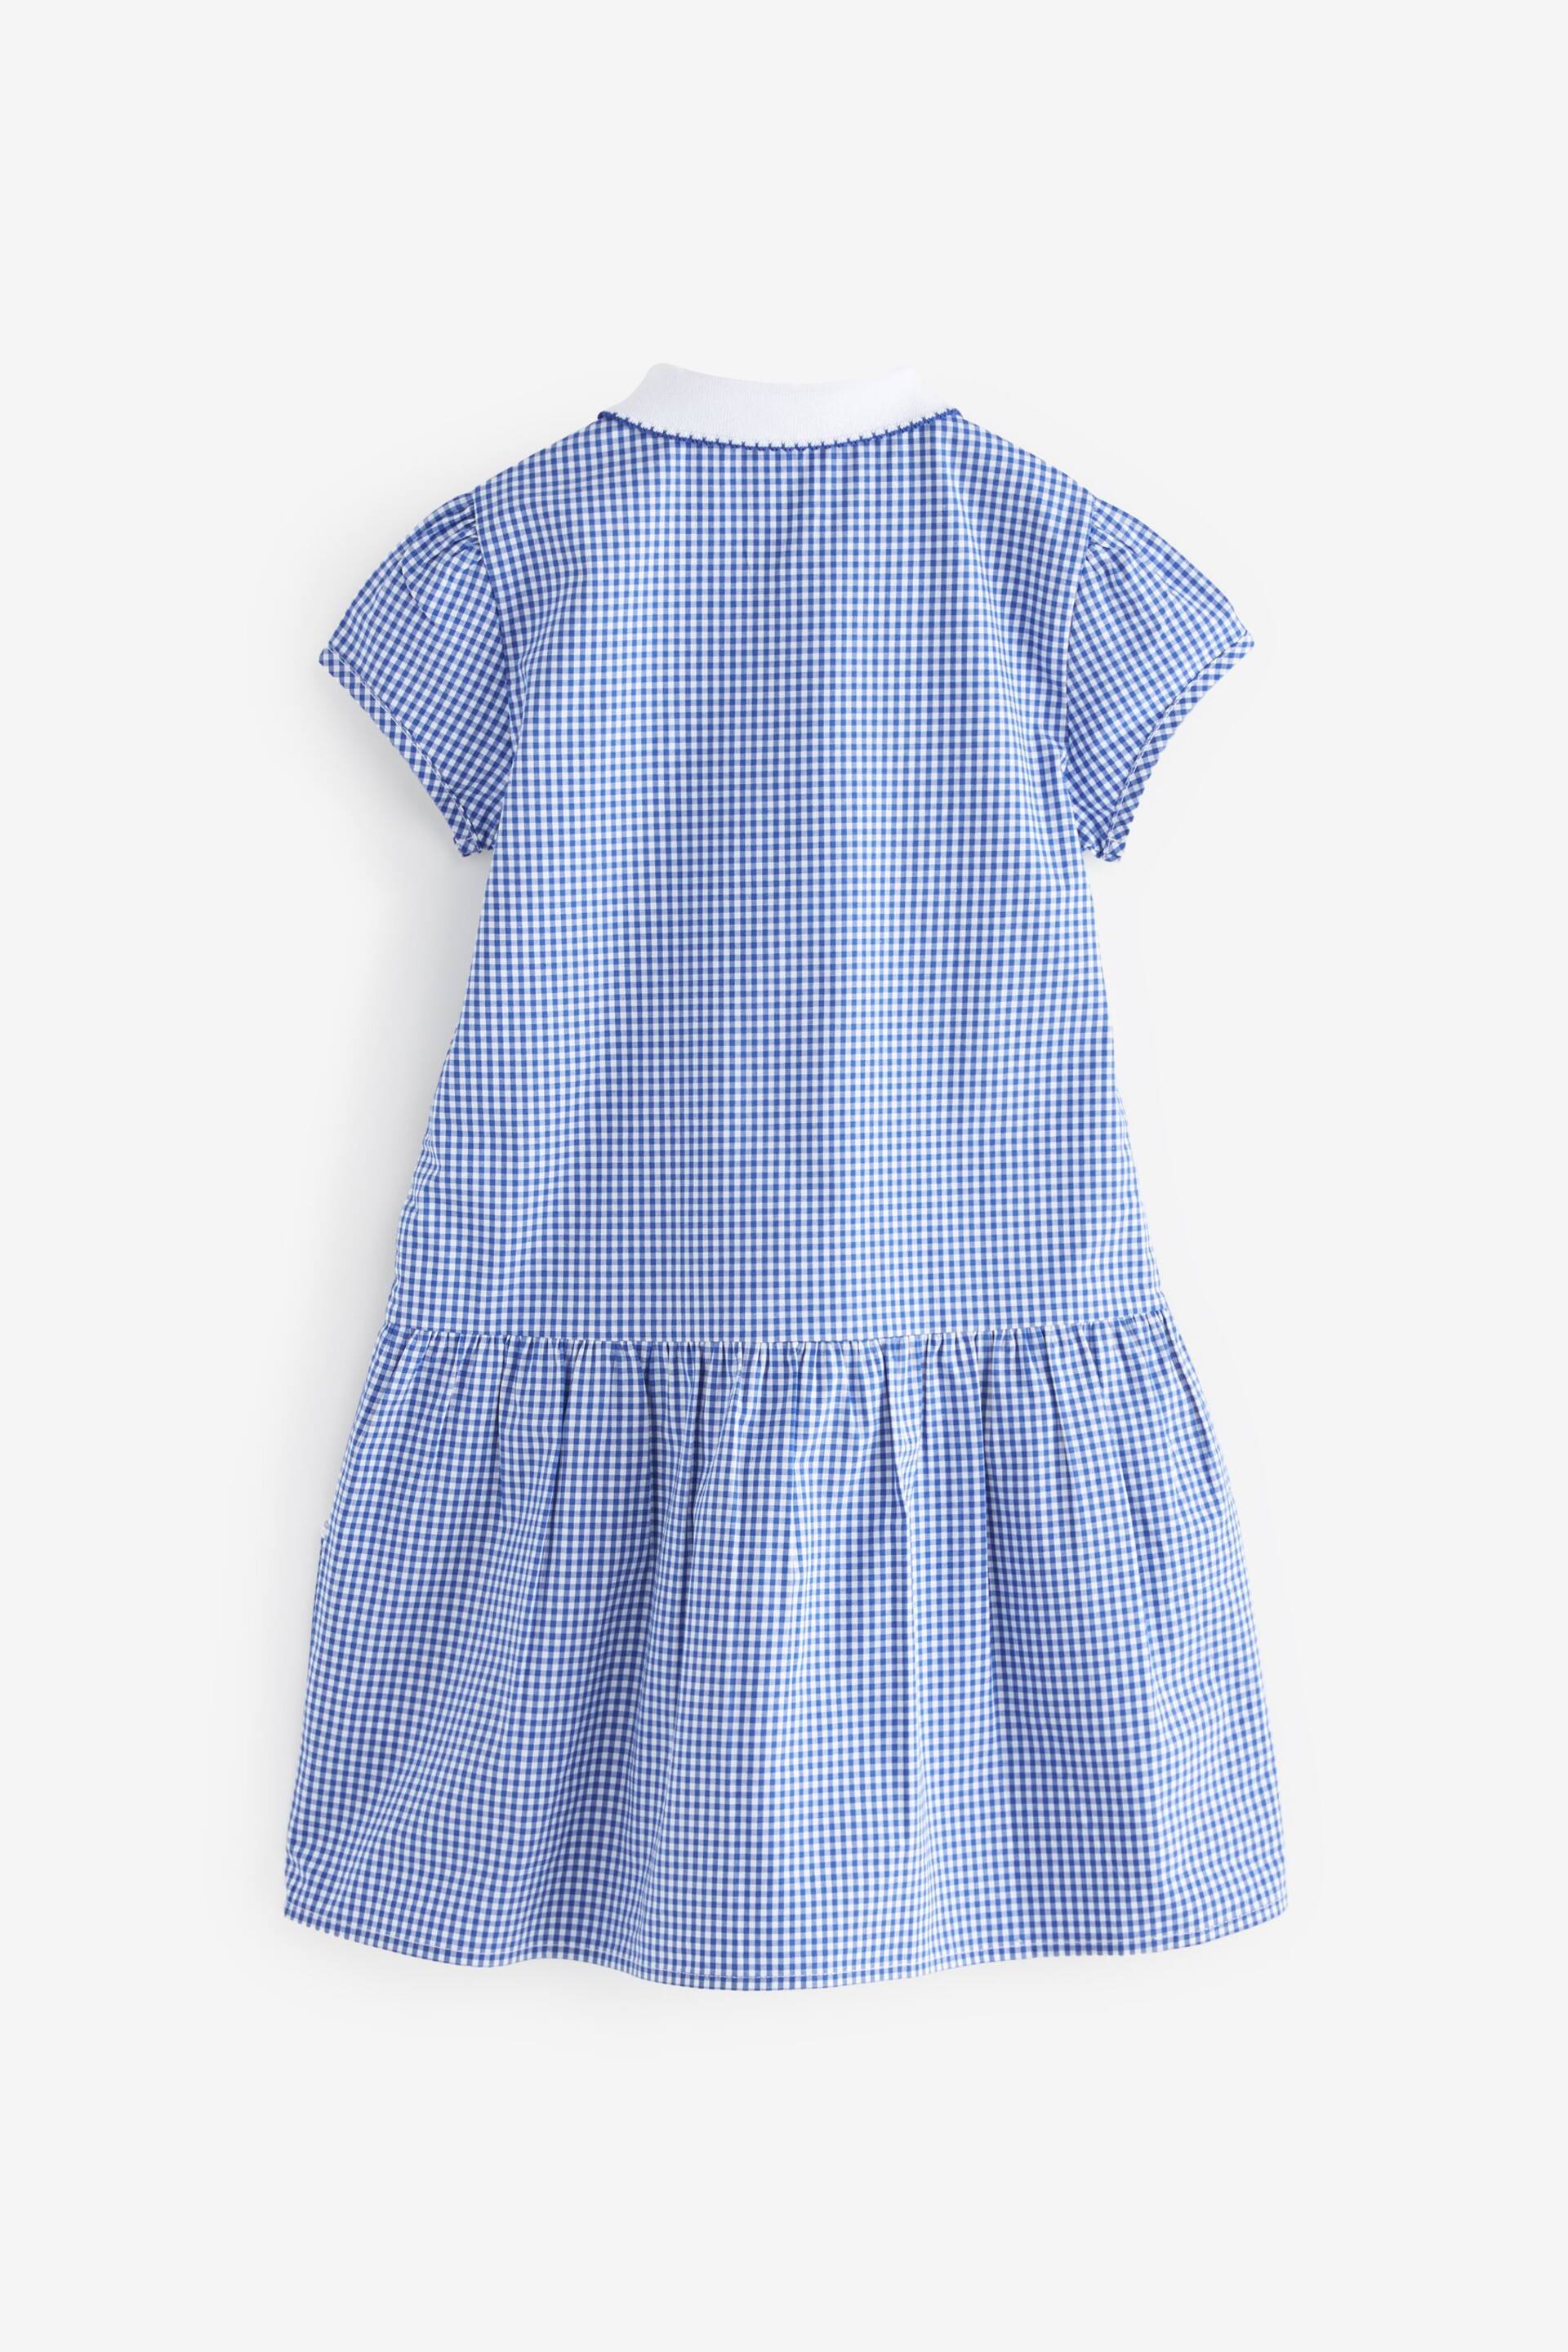 Mid Blue Cotton Rich School Gingham Zip Dress (3-14yrs) - Image 6 of 7